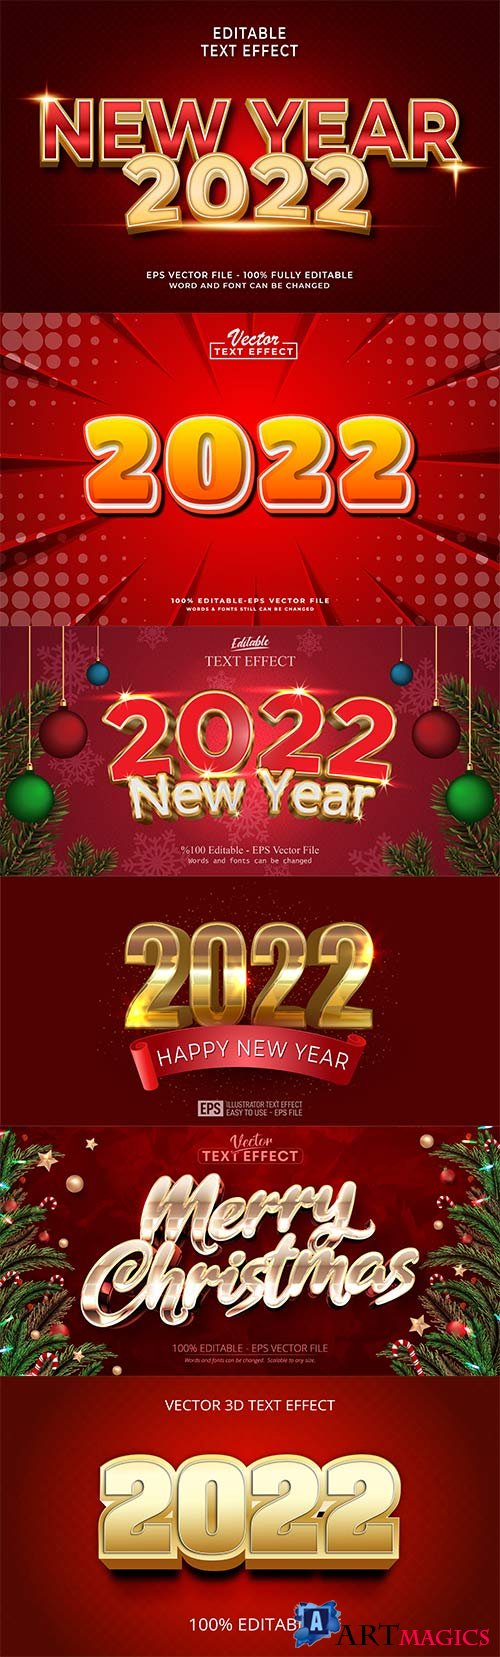 Merry christmas and happy new year 2022 editable vector text effects vol 3